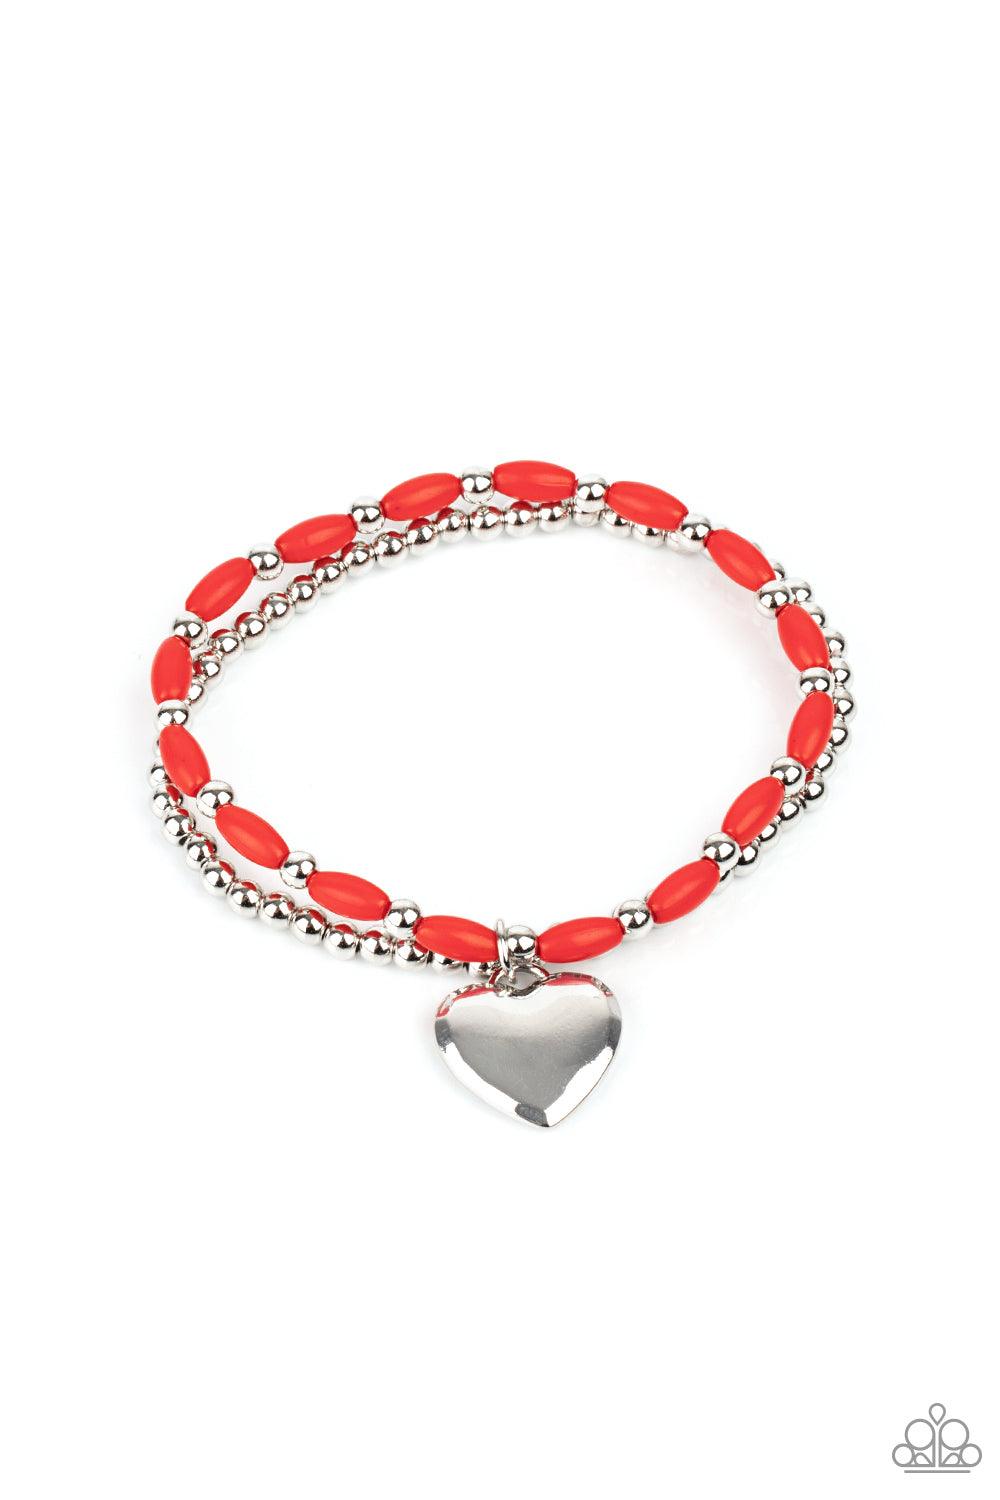 Paparazzi Accessories Candy Gram - Red A shiny silver heart dangles from a strand of fiery red beads. It is paired with a strand of round silver beads threaded along a stretchy band for a whimsical display around the wrist. Sold as one pair of bracelets.